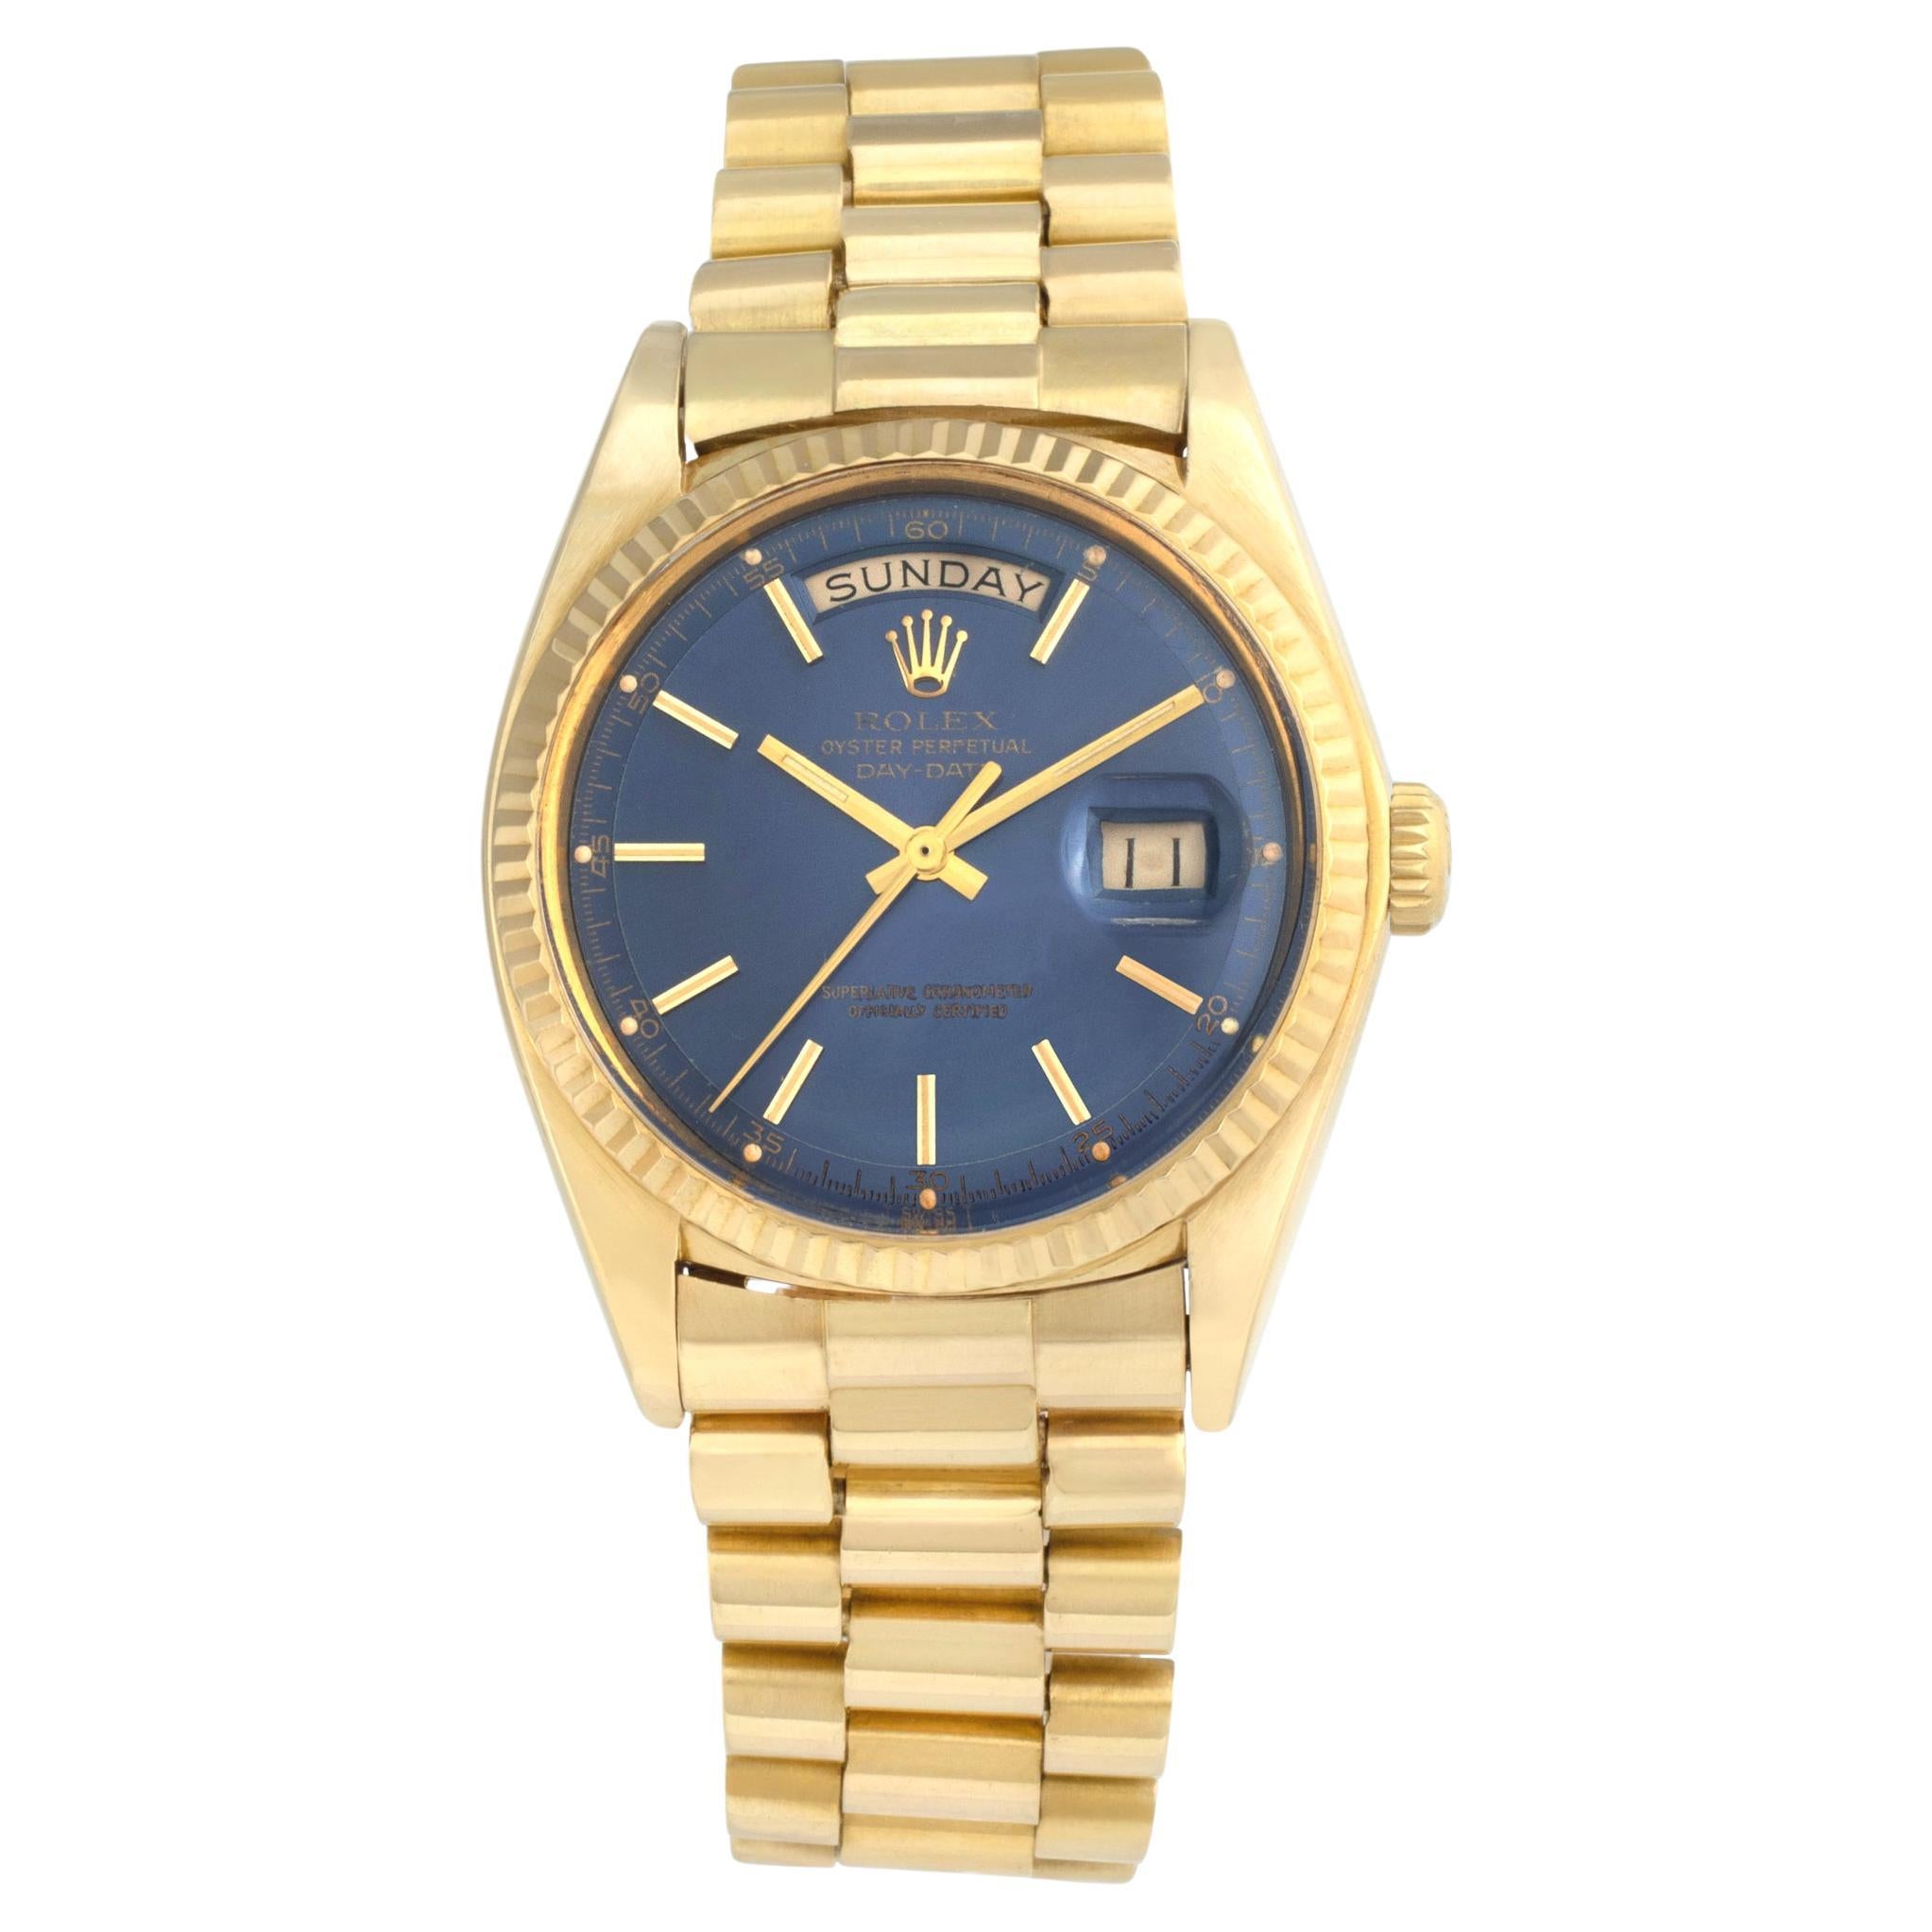 Rolex Day-Date 1803 in yellow gold 36mm automatic watch